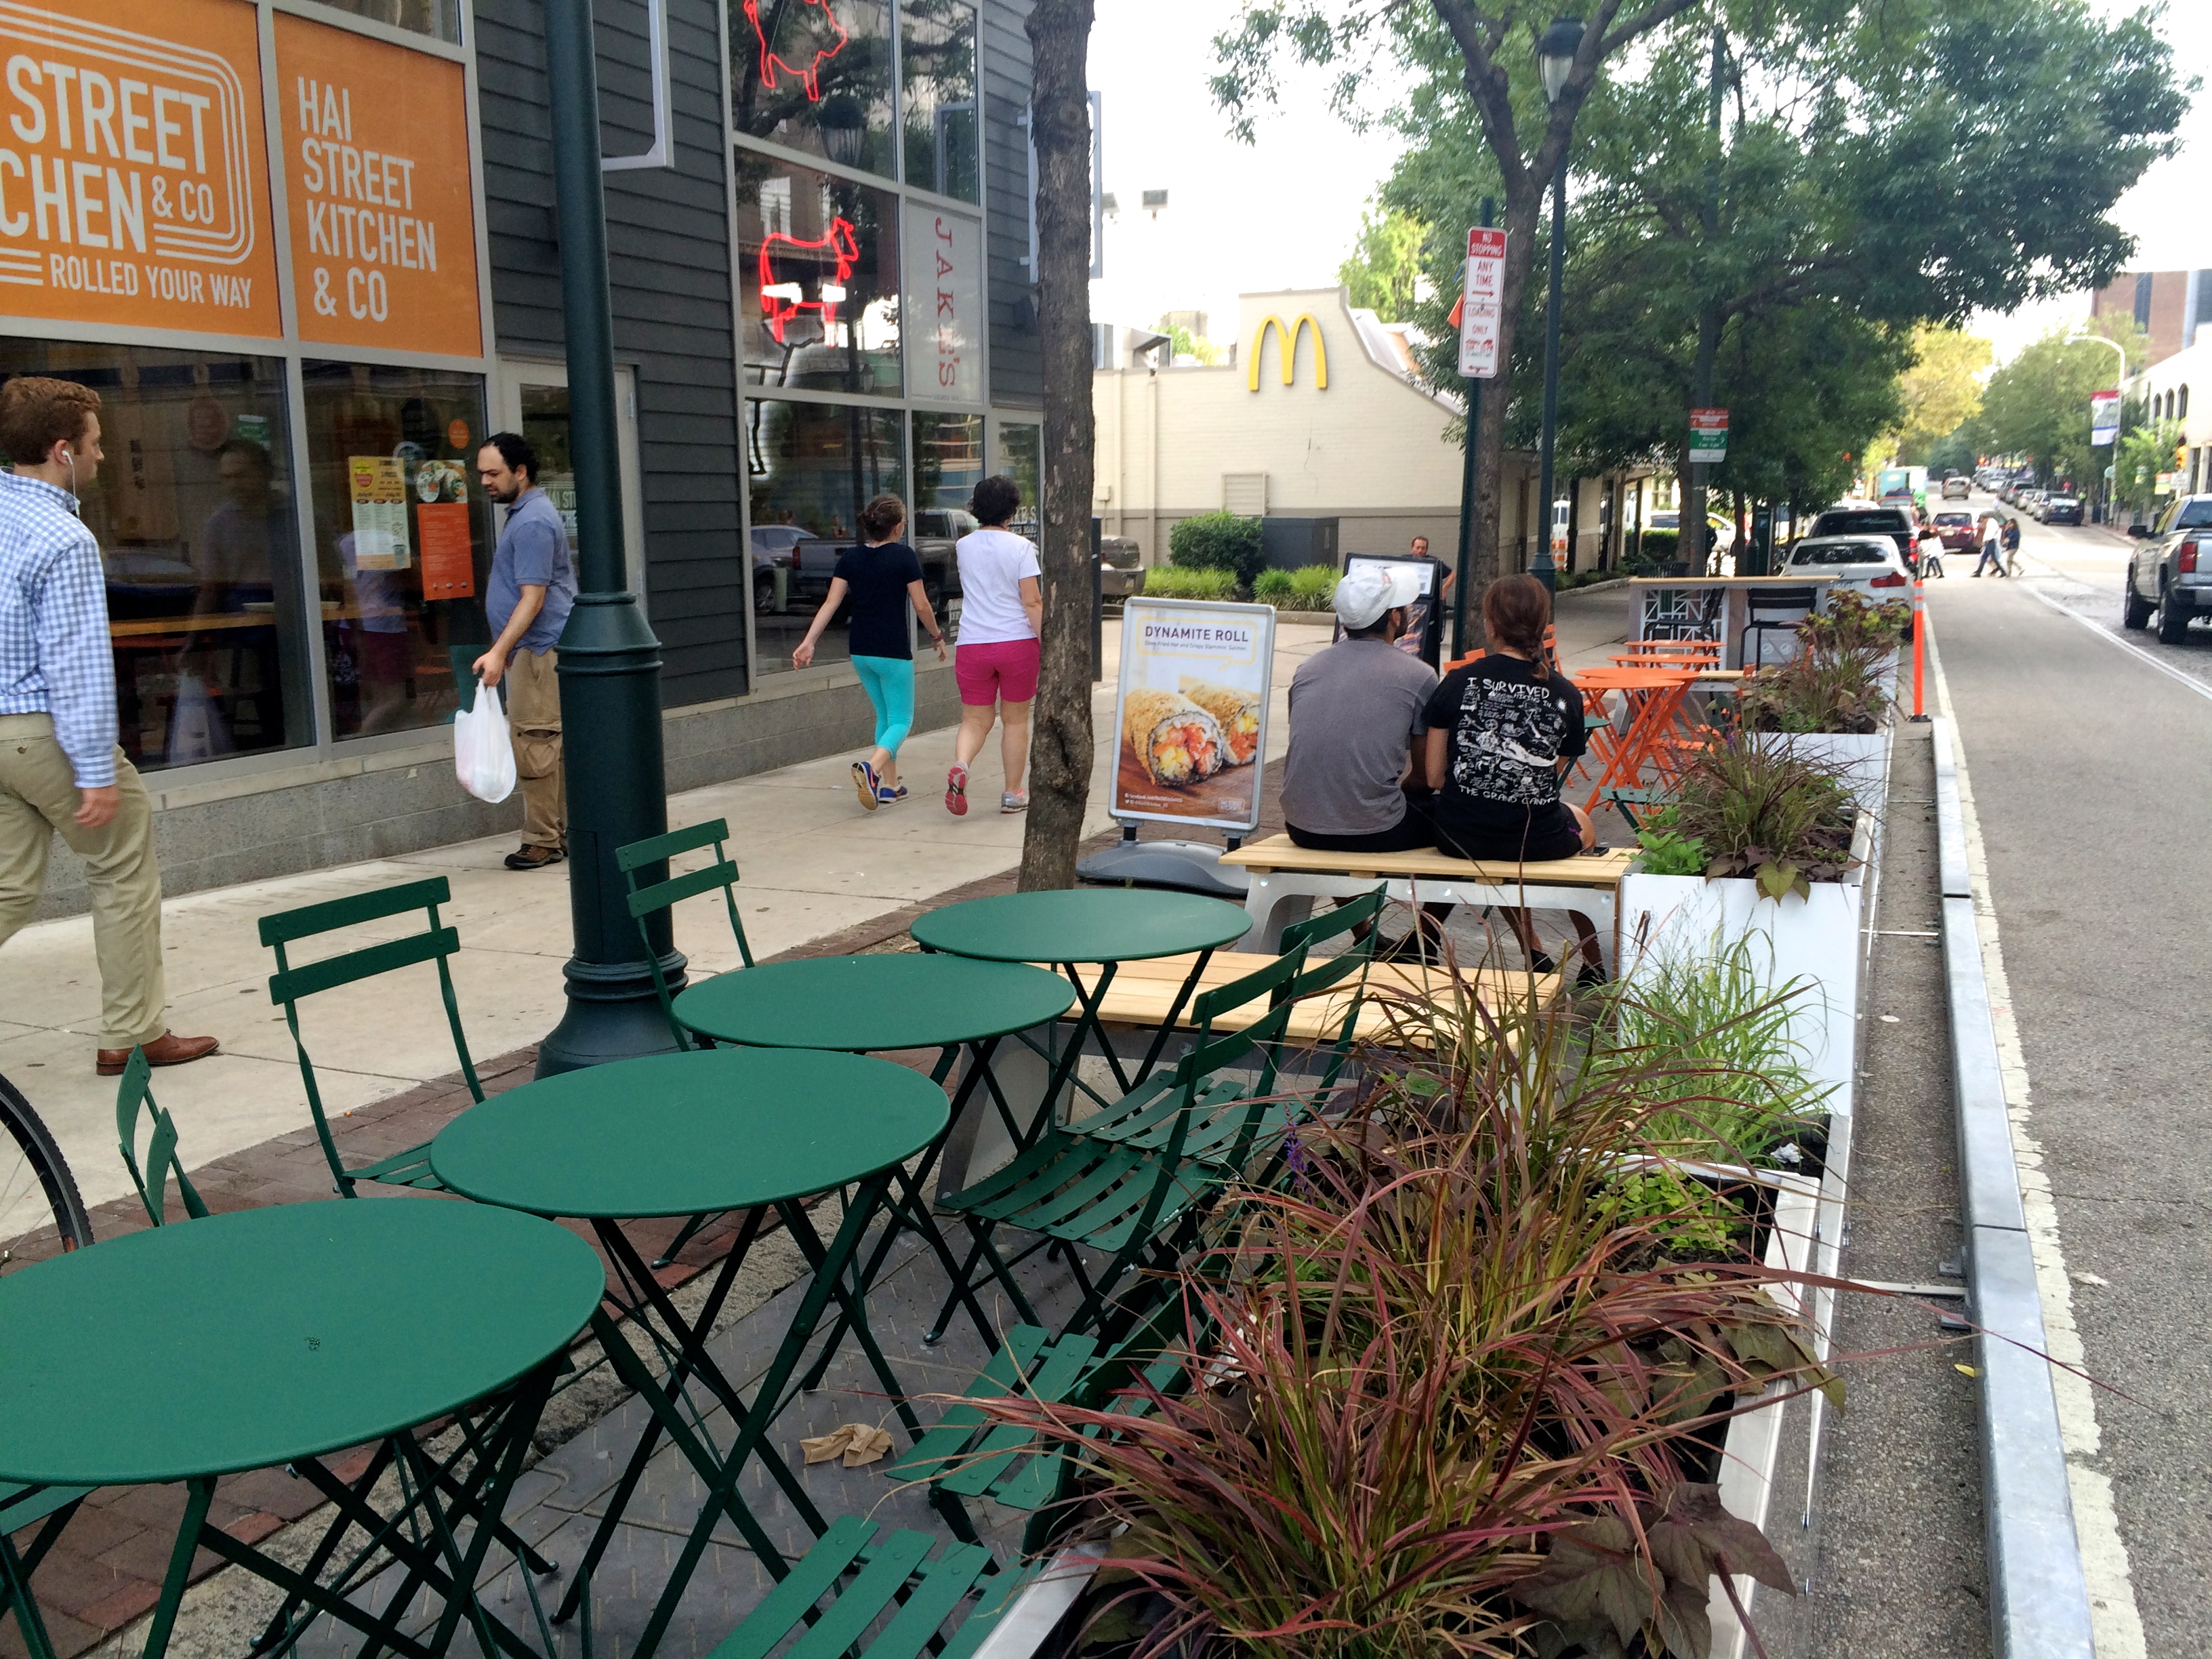 Parklet seating options include bistro tables and benches